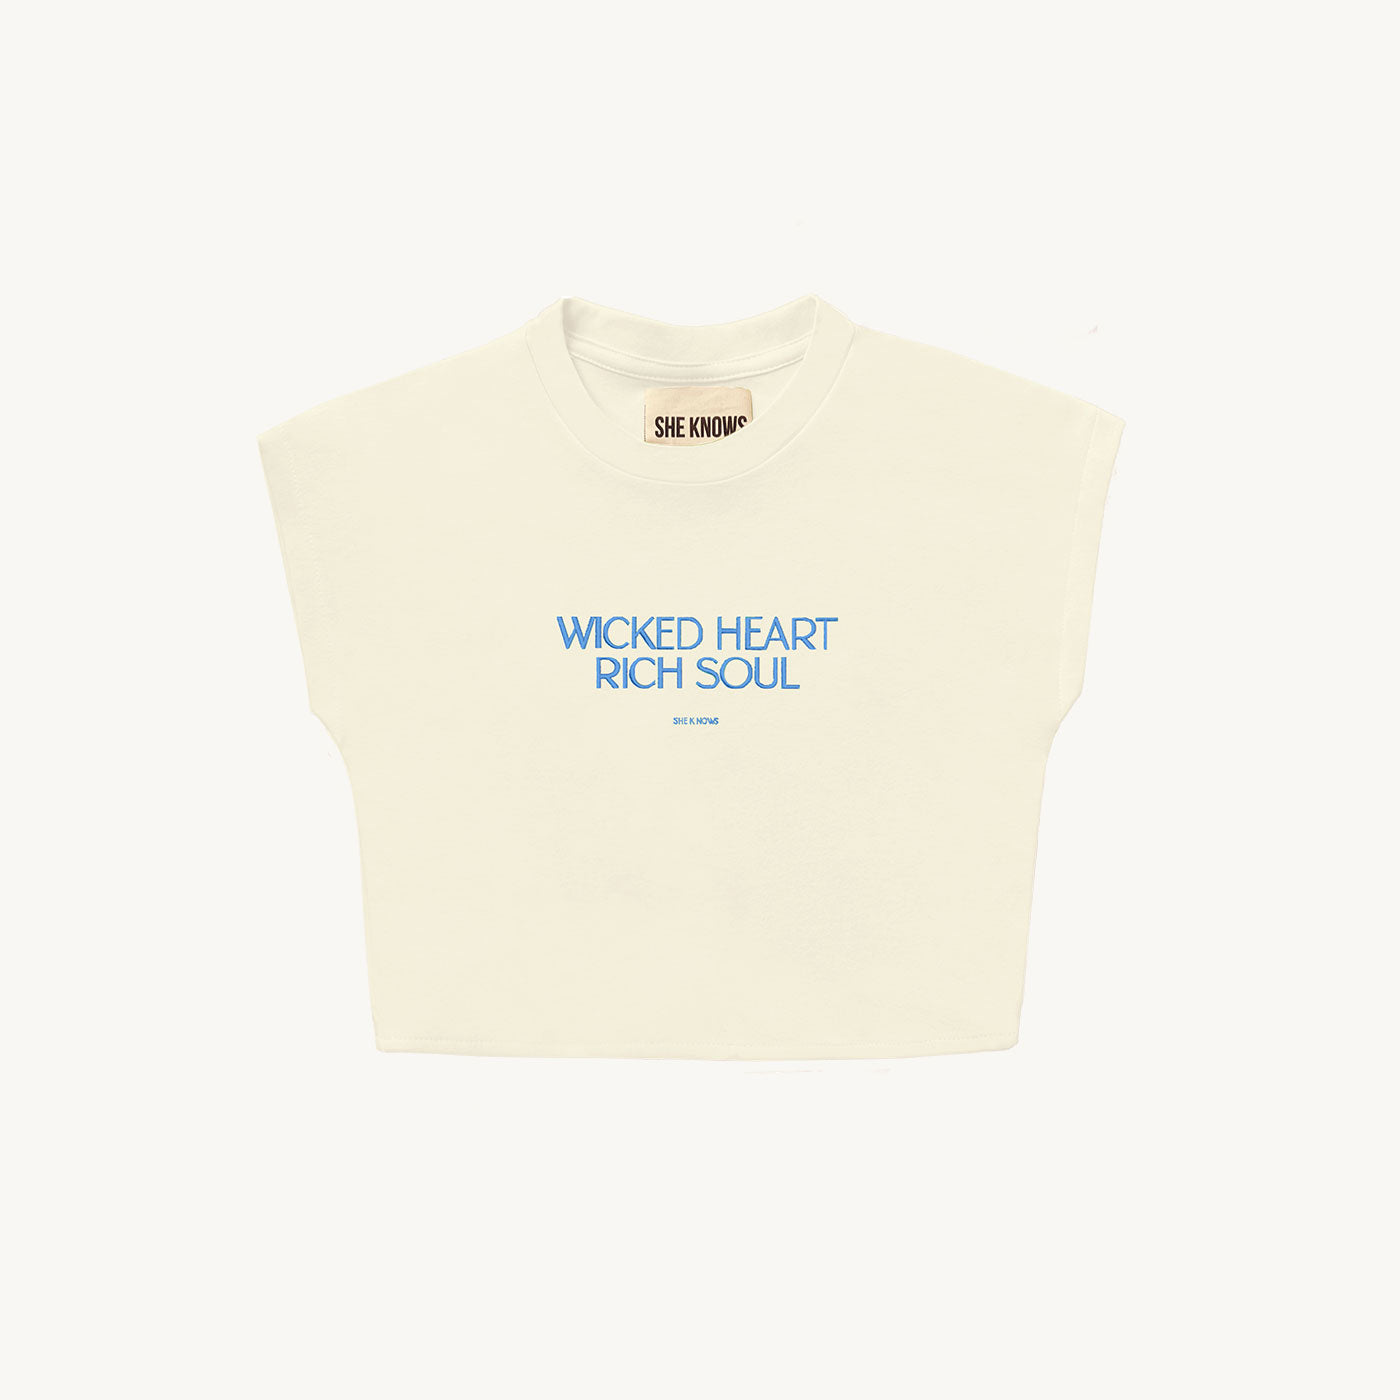 SHE KNOWS - Wicked Heart Baby Tee